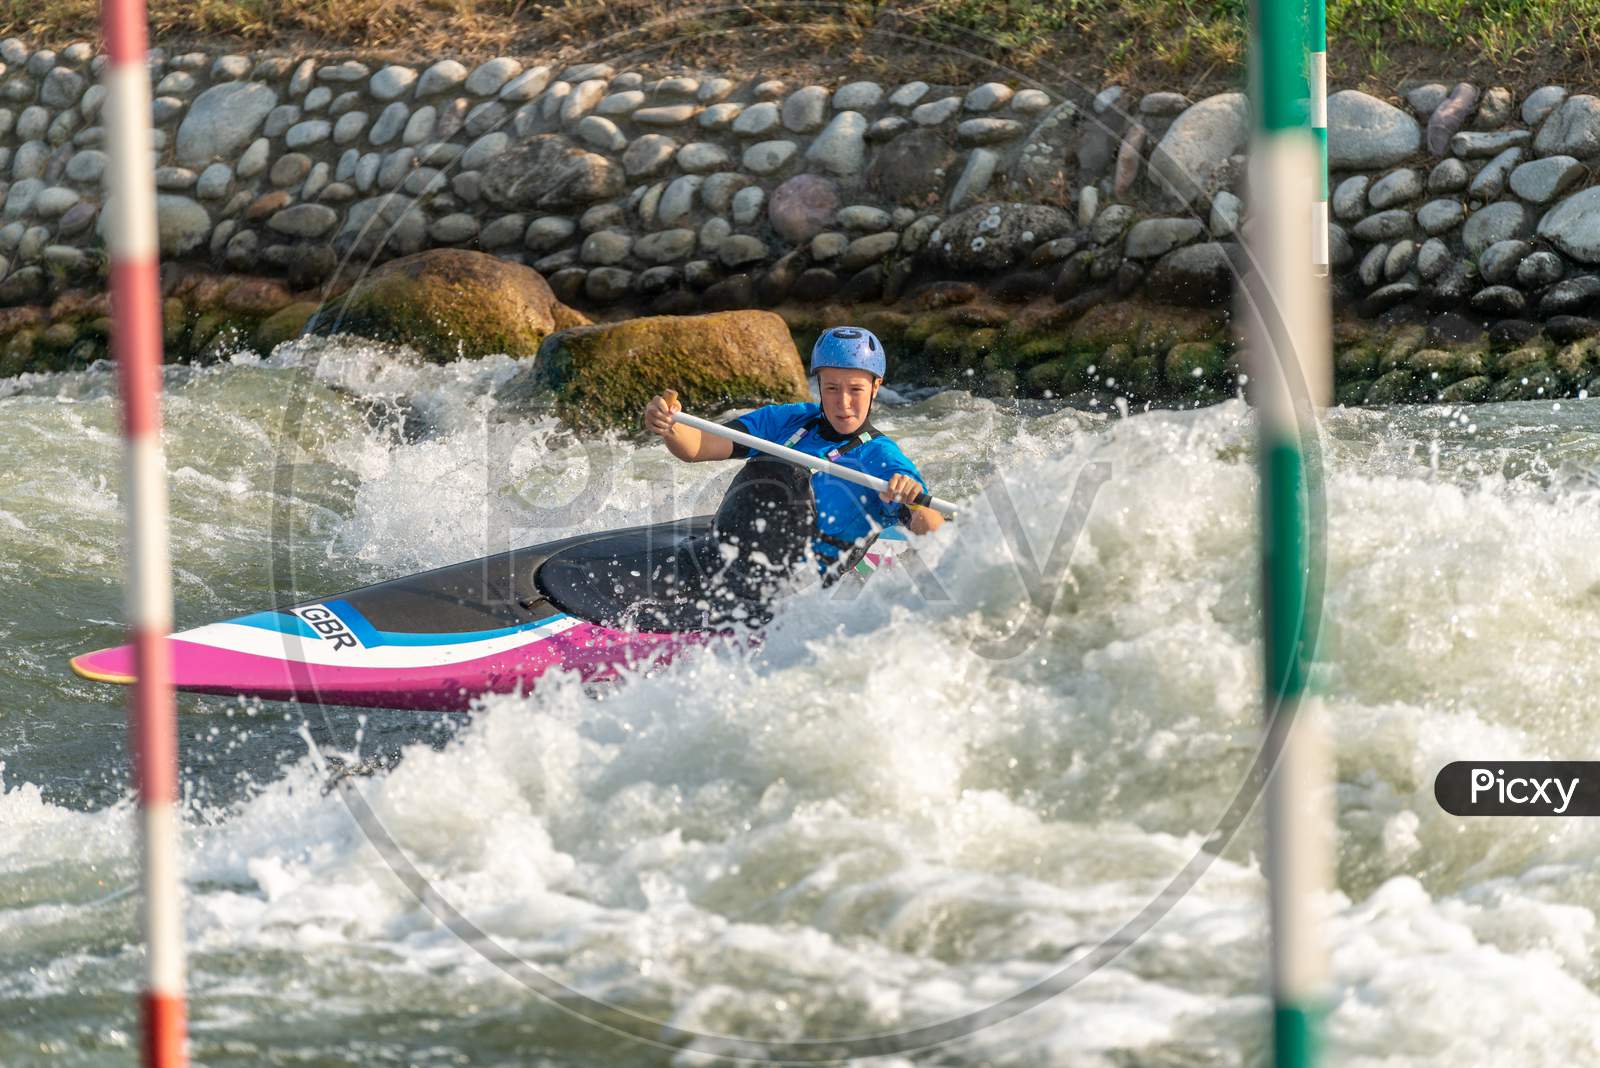 Great Britain Canoe Slalom Athlete Training On White Water With Poles In The Foreground